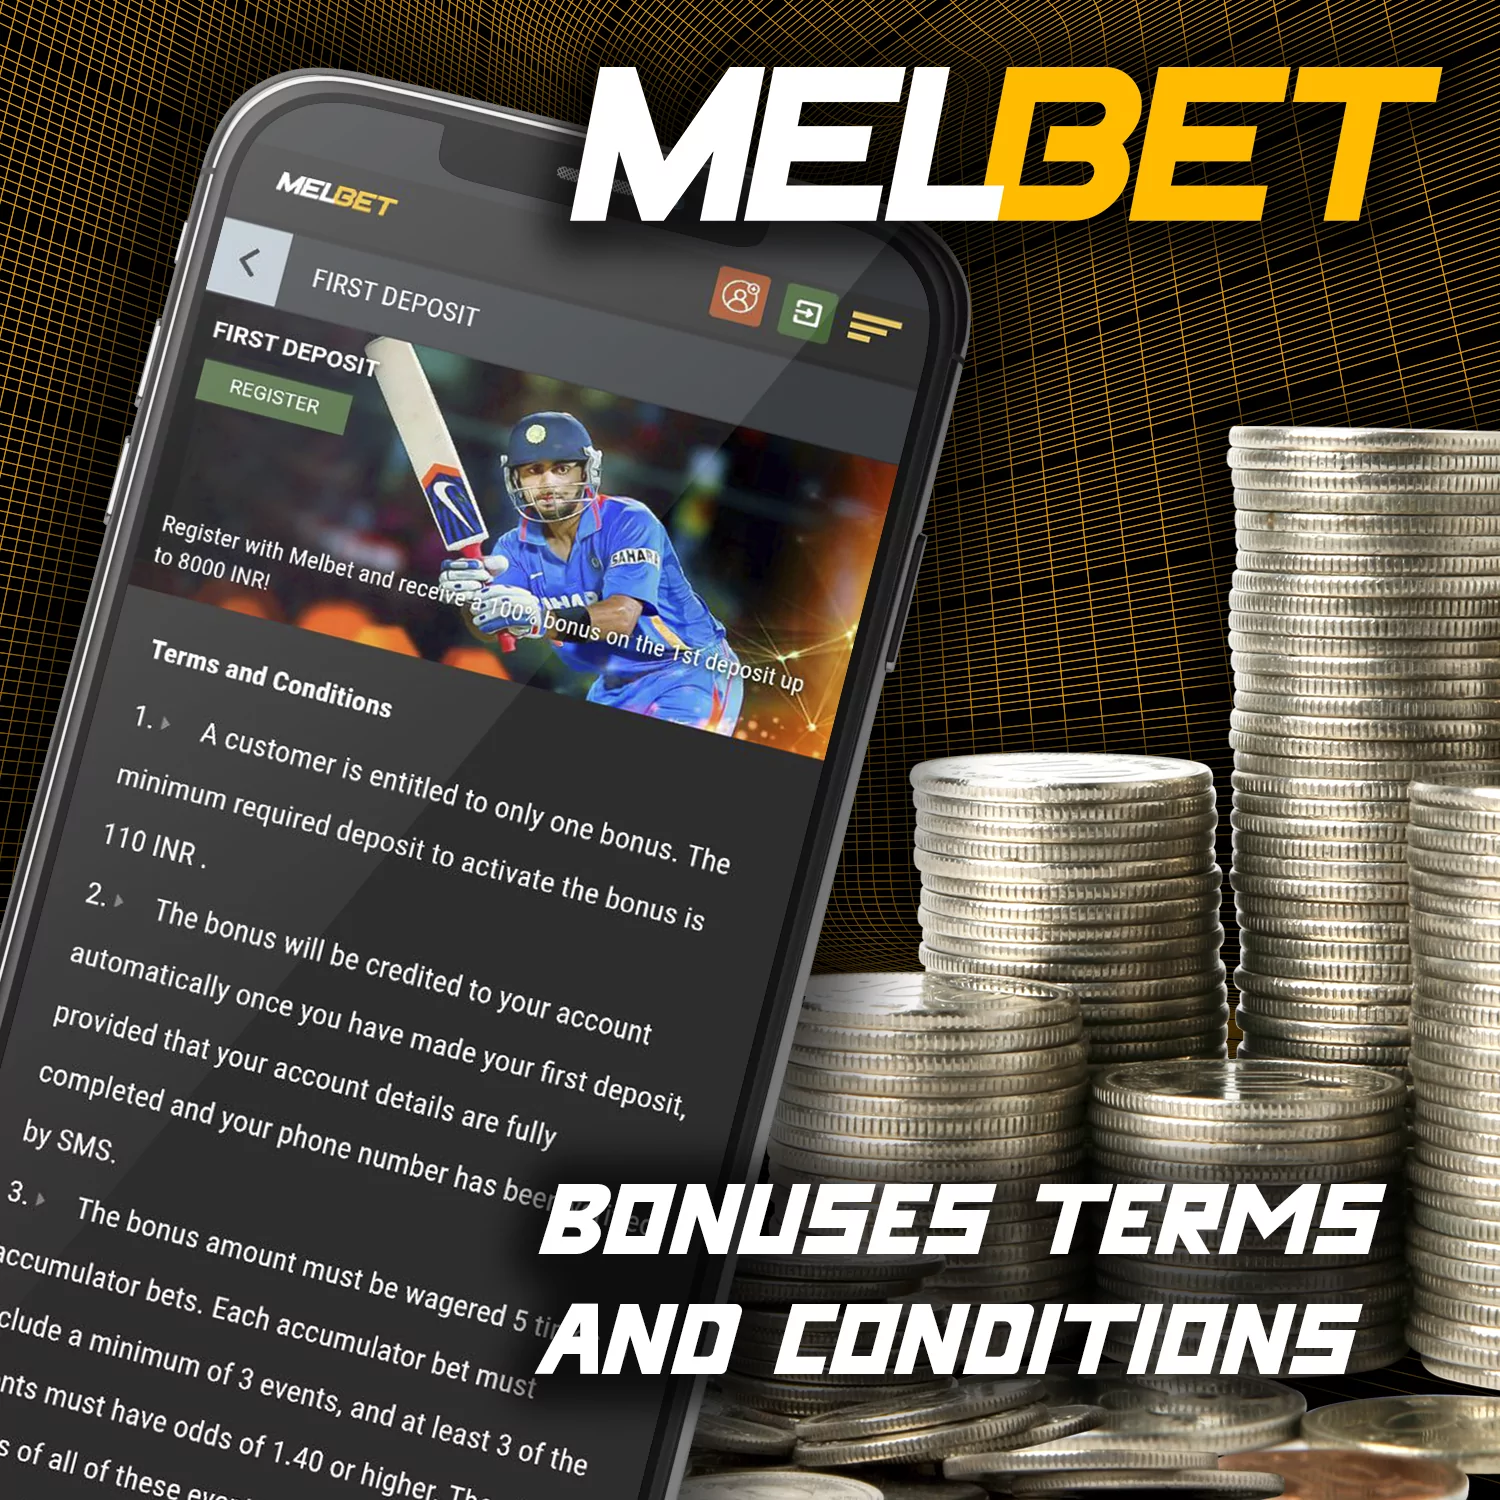 To get Melbet bonuses you have to follow a number of terms and conditions.